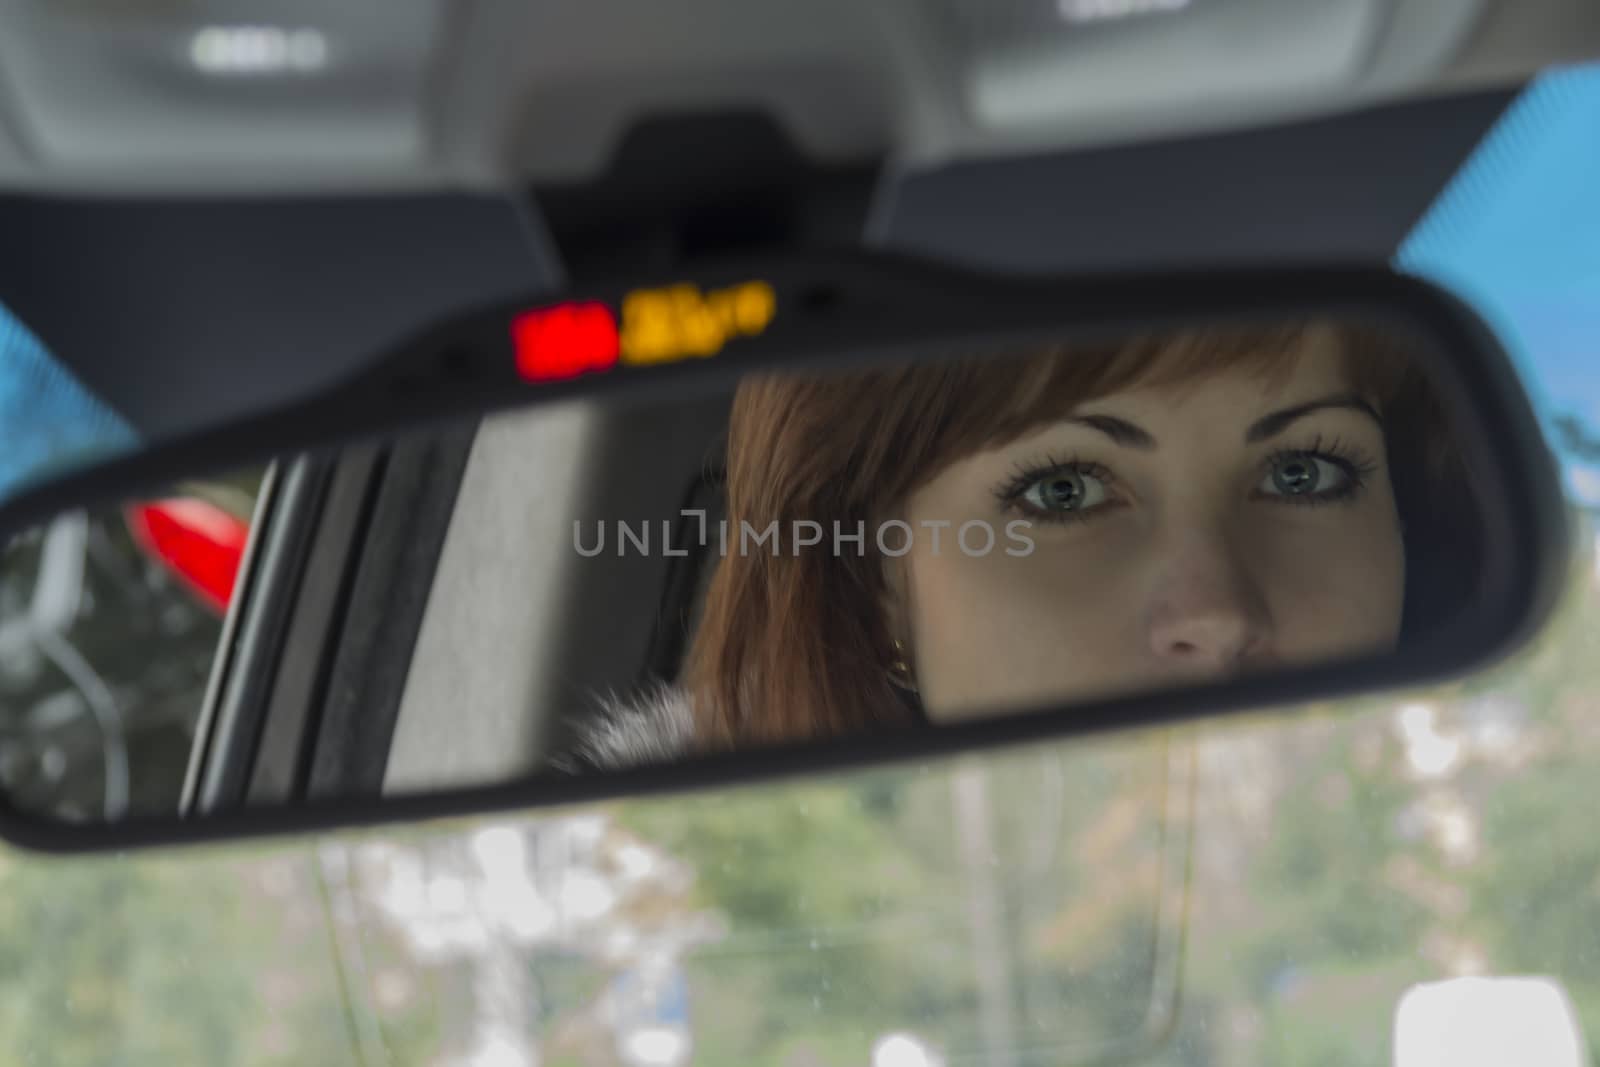 The eyes of a young girl looking in the rearview mirror of the vehicle